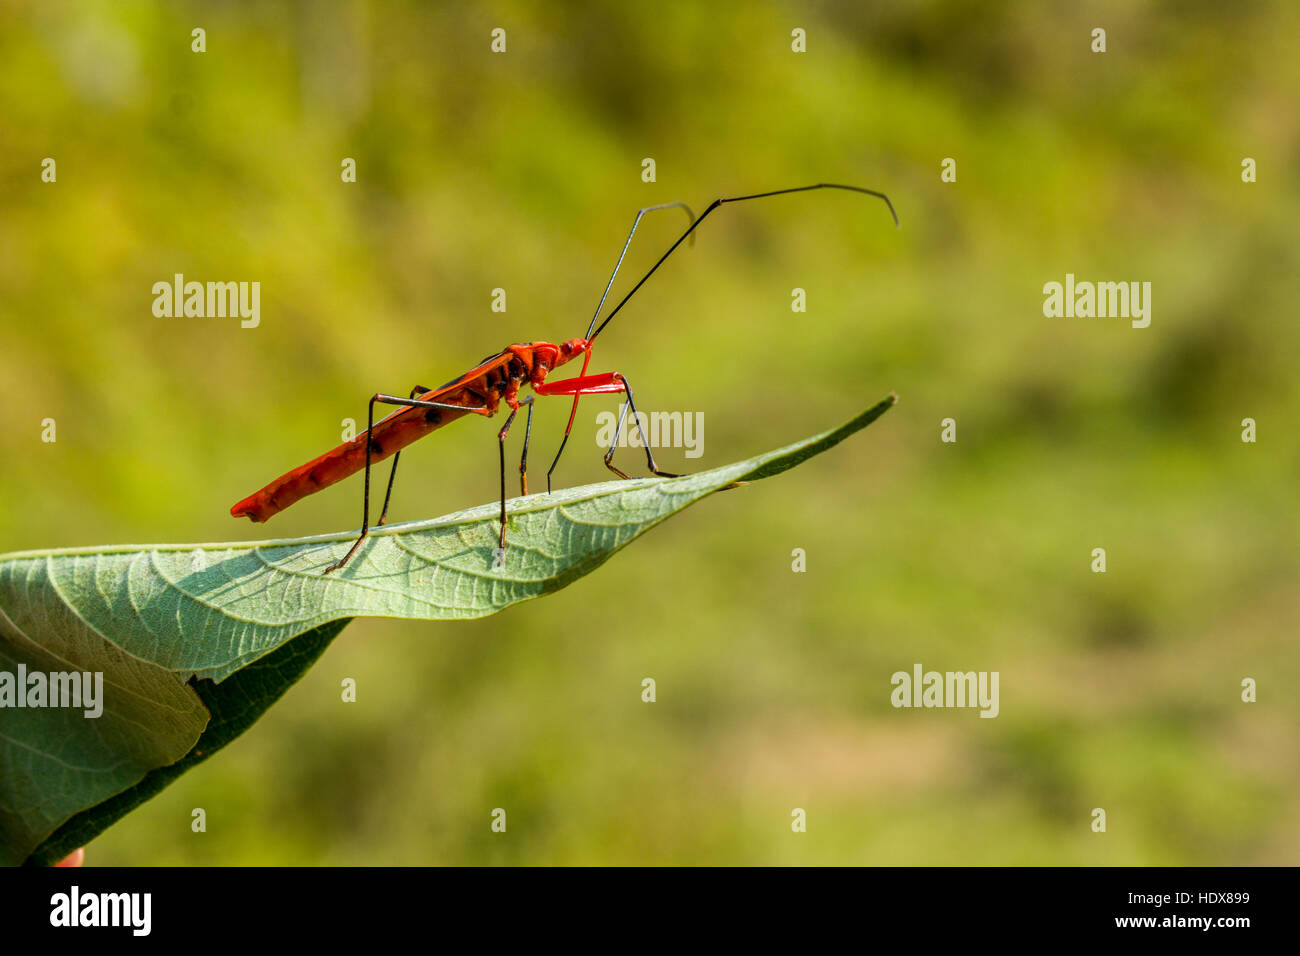 A Red Cotton Bug (Dysdercus cingulatus) is sitting on the leave of a tree Stock Photo